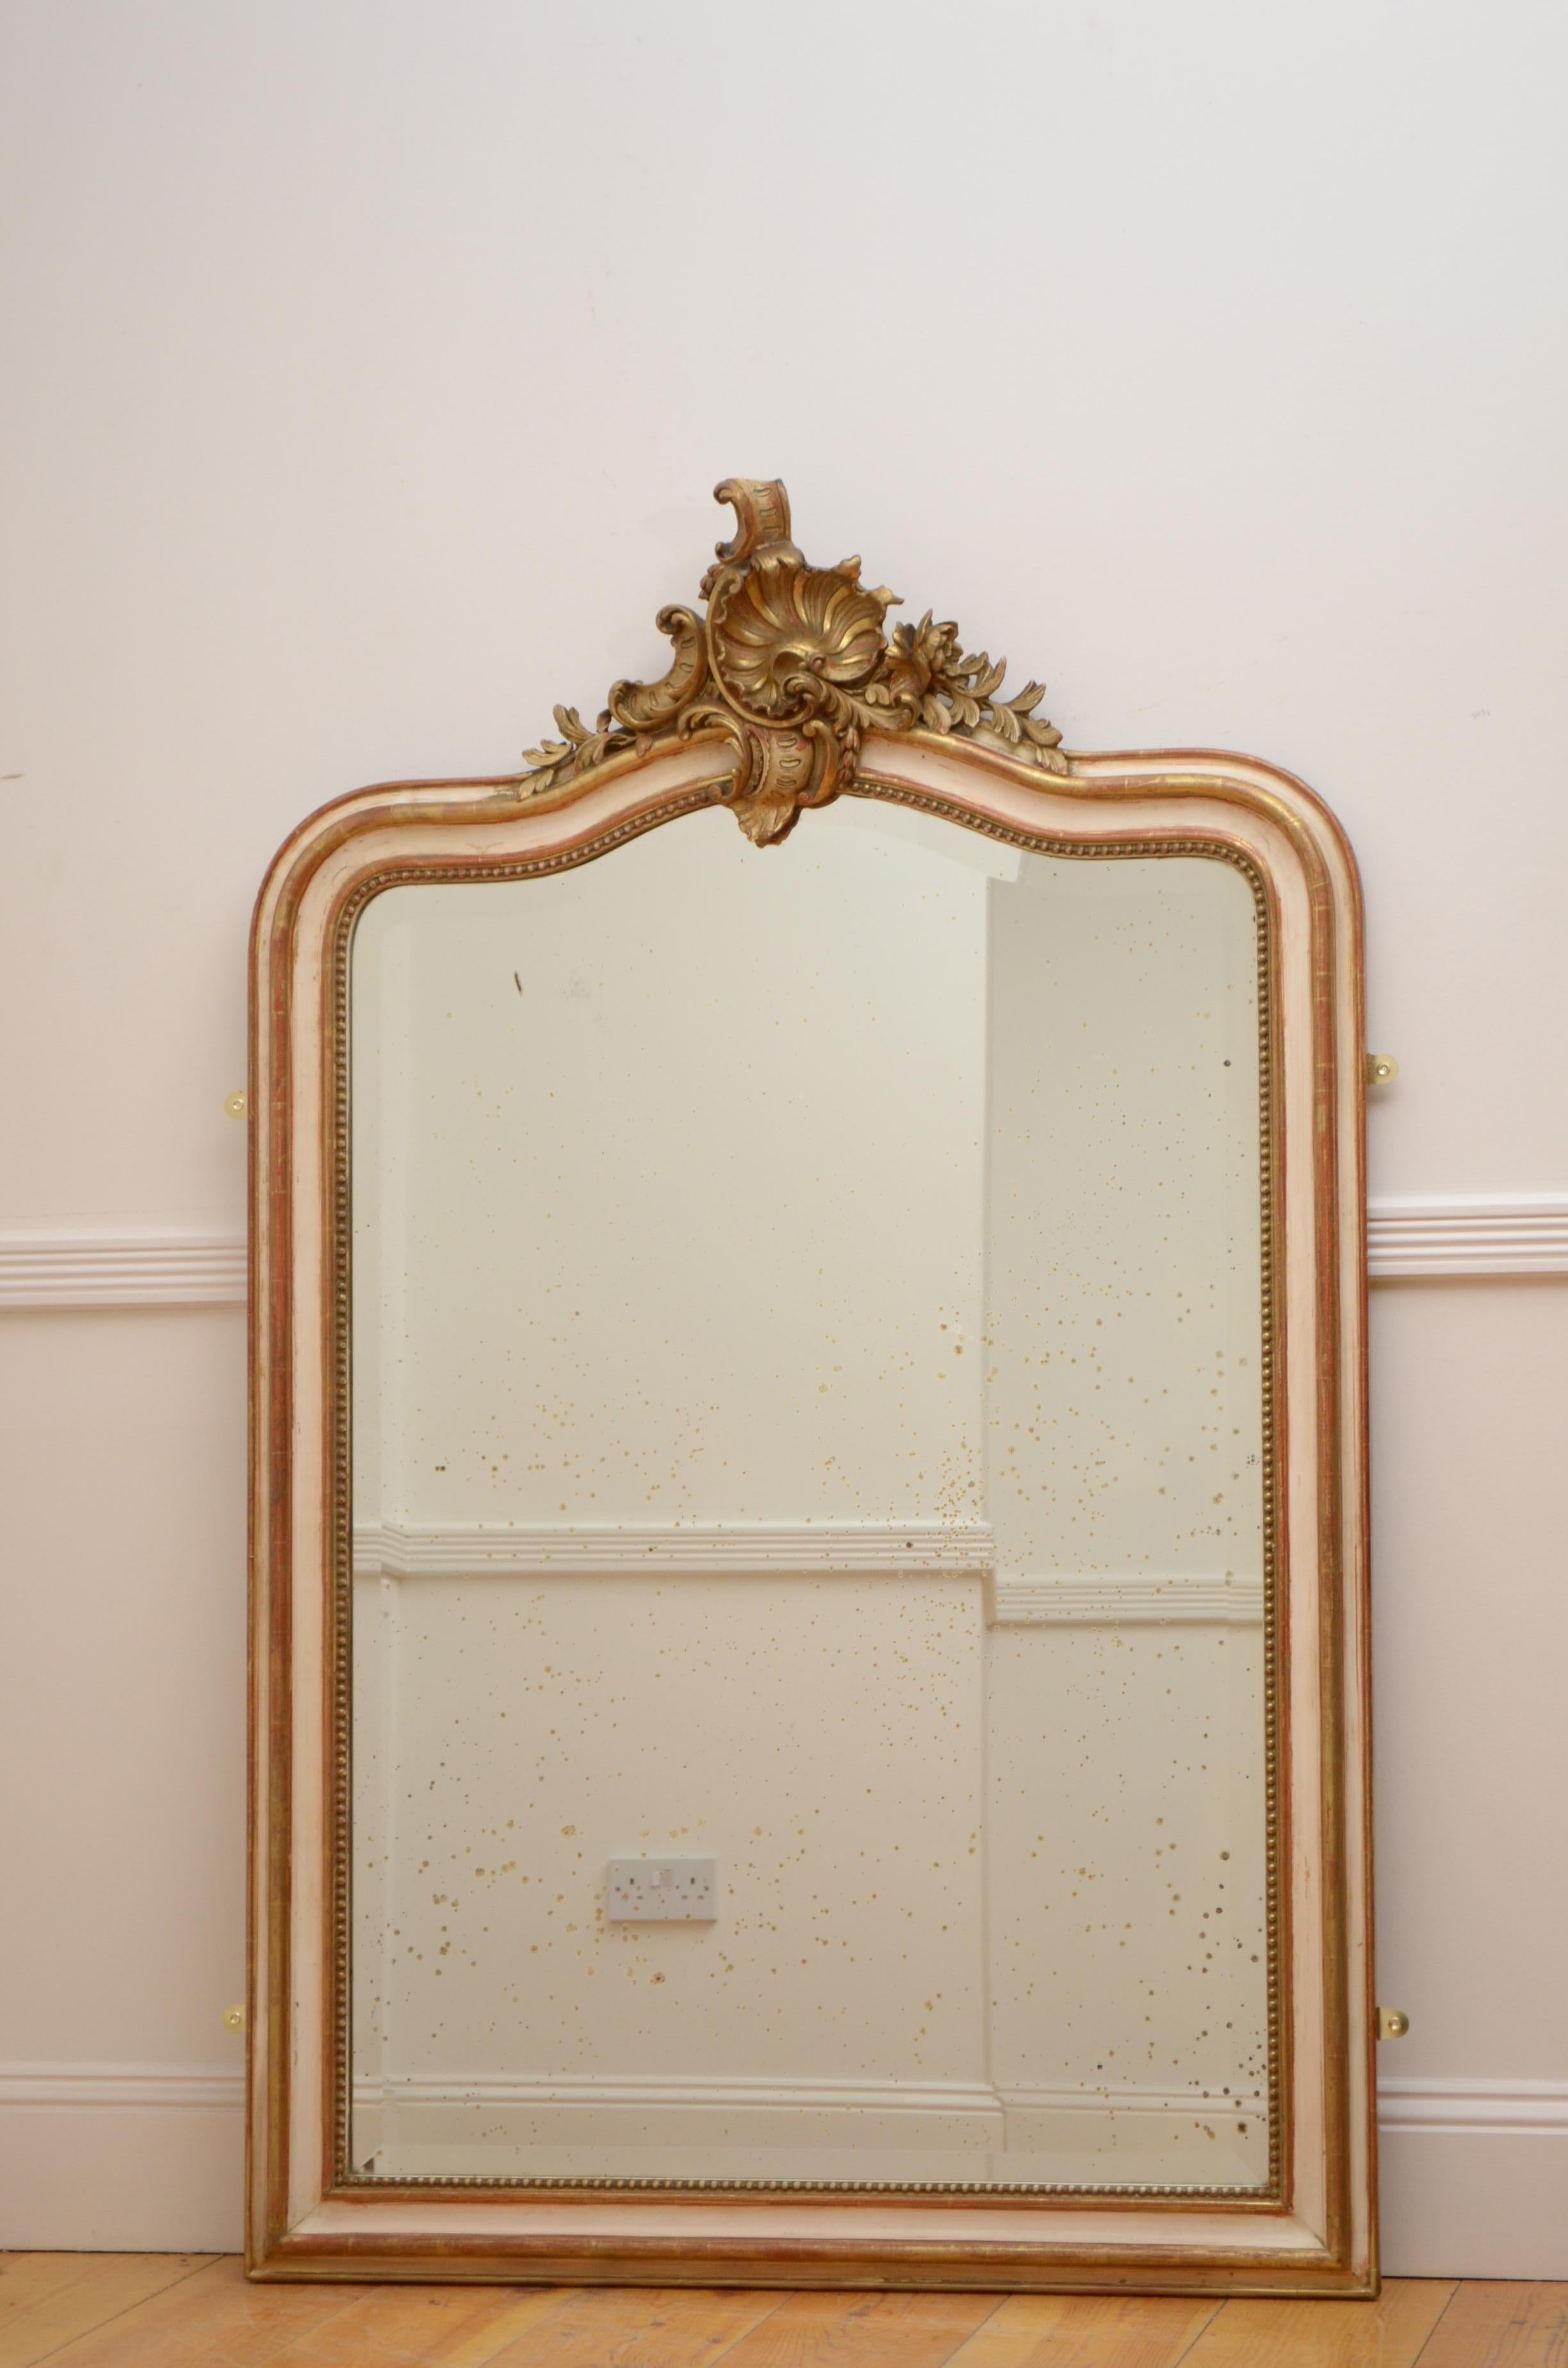 K0467 beautiful French, cream and gold leaf wall mirror, having original bevelled edge glass with some foxing in beaded and shaped frame with shell and floral centre crest to the top. This antique mirror retains its original glass, original gold